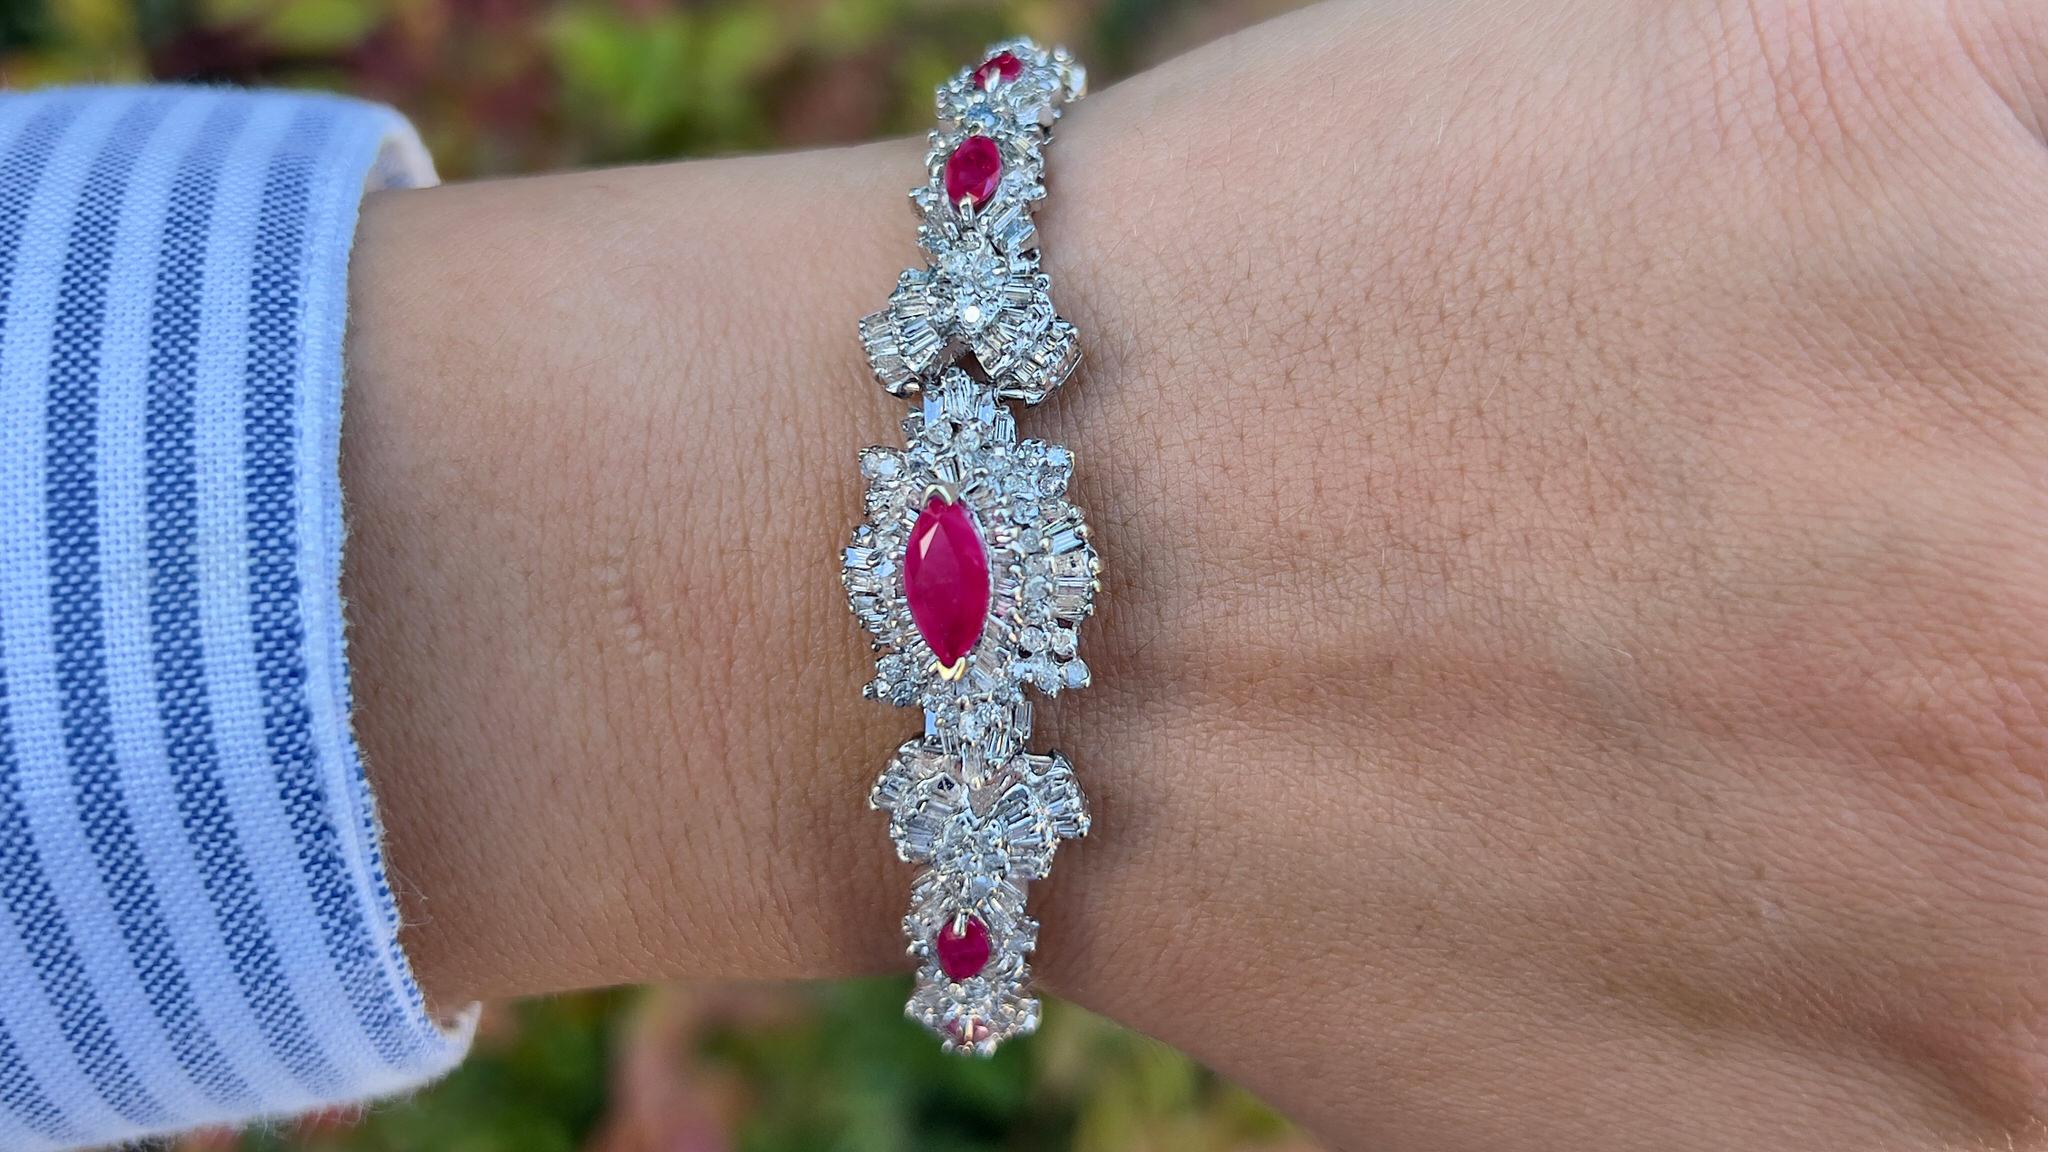 It comes with the Gemological Appraisal by GIA GG/AJP
All Gemstones are Natural
Rubies = 5.28 Carats
Cut: Marquise
Diamonds = 6.82 Carats
Color: F-H, Clarity: VVS-SI
Metal: 14K White Gold
Bracelet Length: 7 Inches